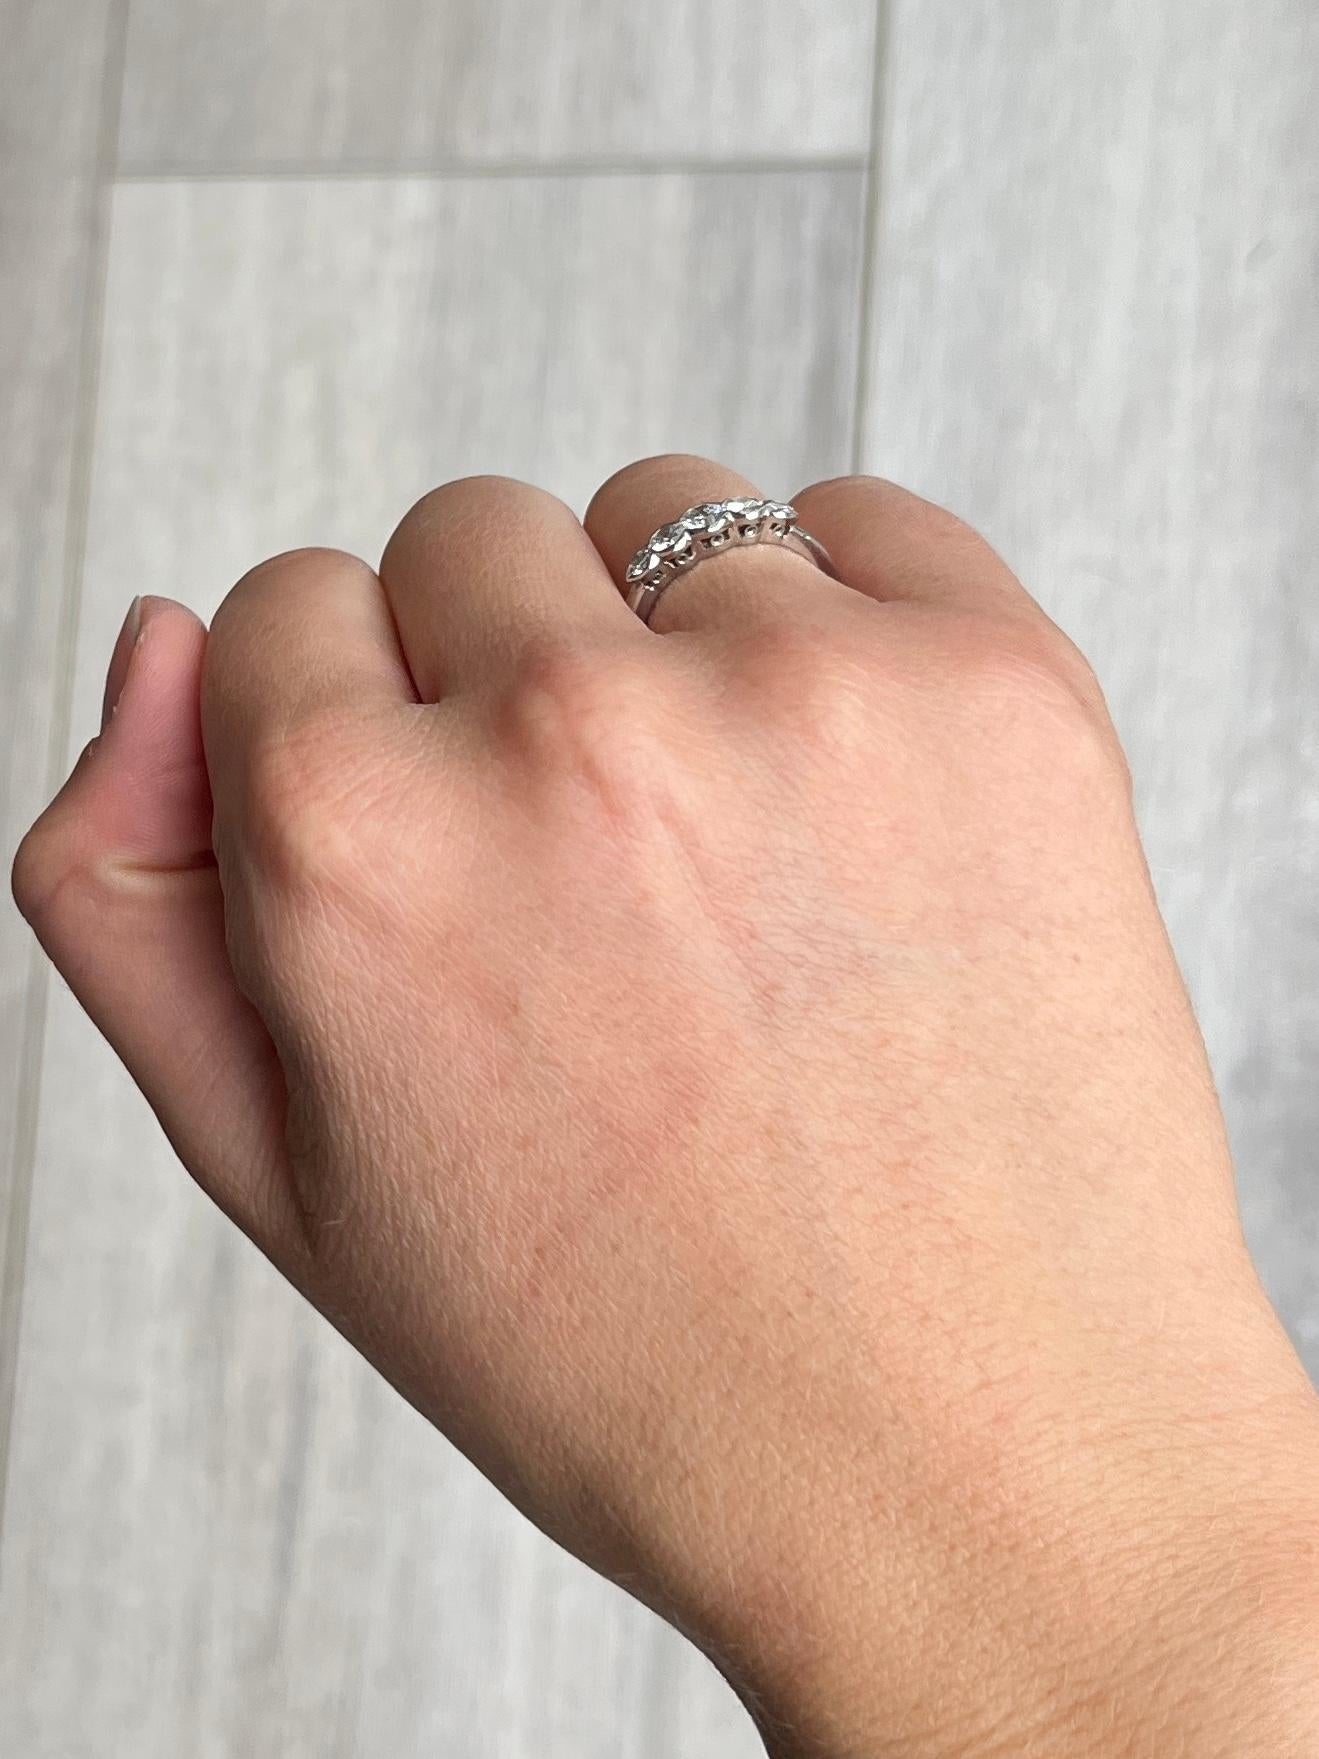 An exquisite vintage five-stone diamond ring, modelled in platinum. Set with five impressive graduated white diamonds on fine rub over settings, G colour VVSI clarity. The central stone measures 25 points and is flanked either side by 15 point